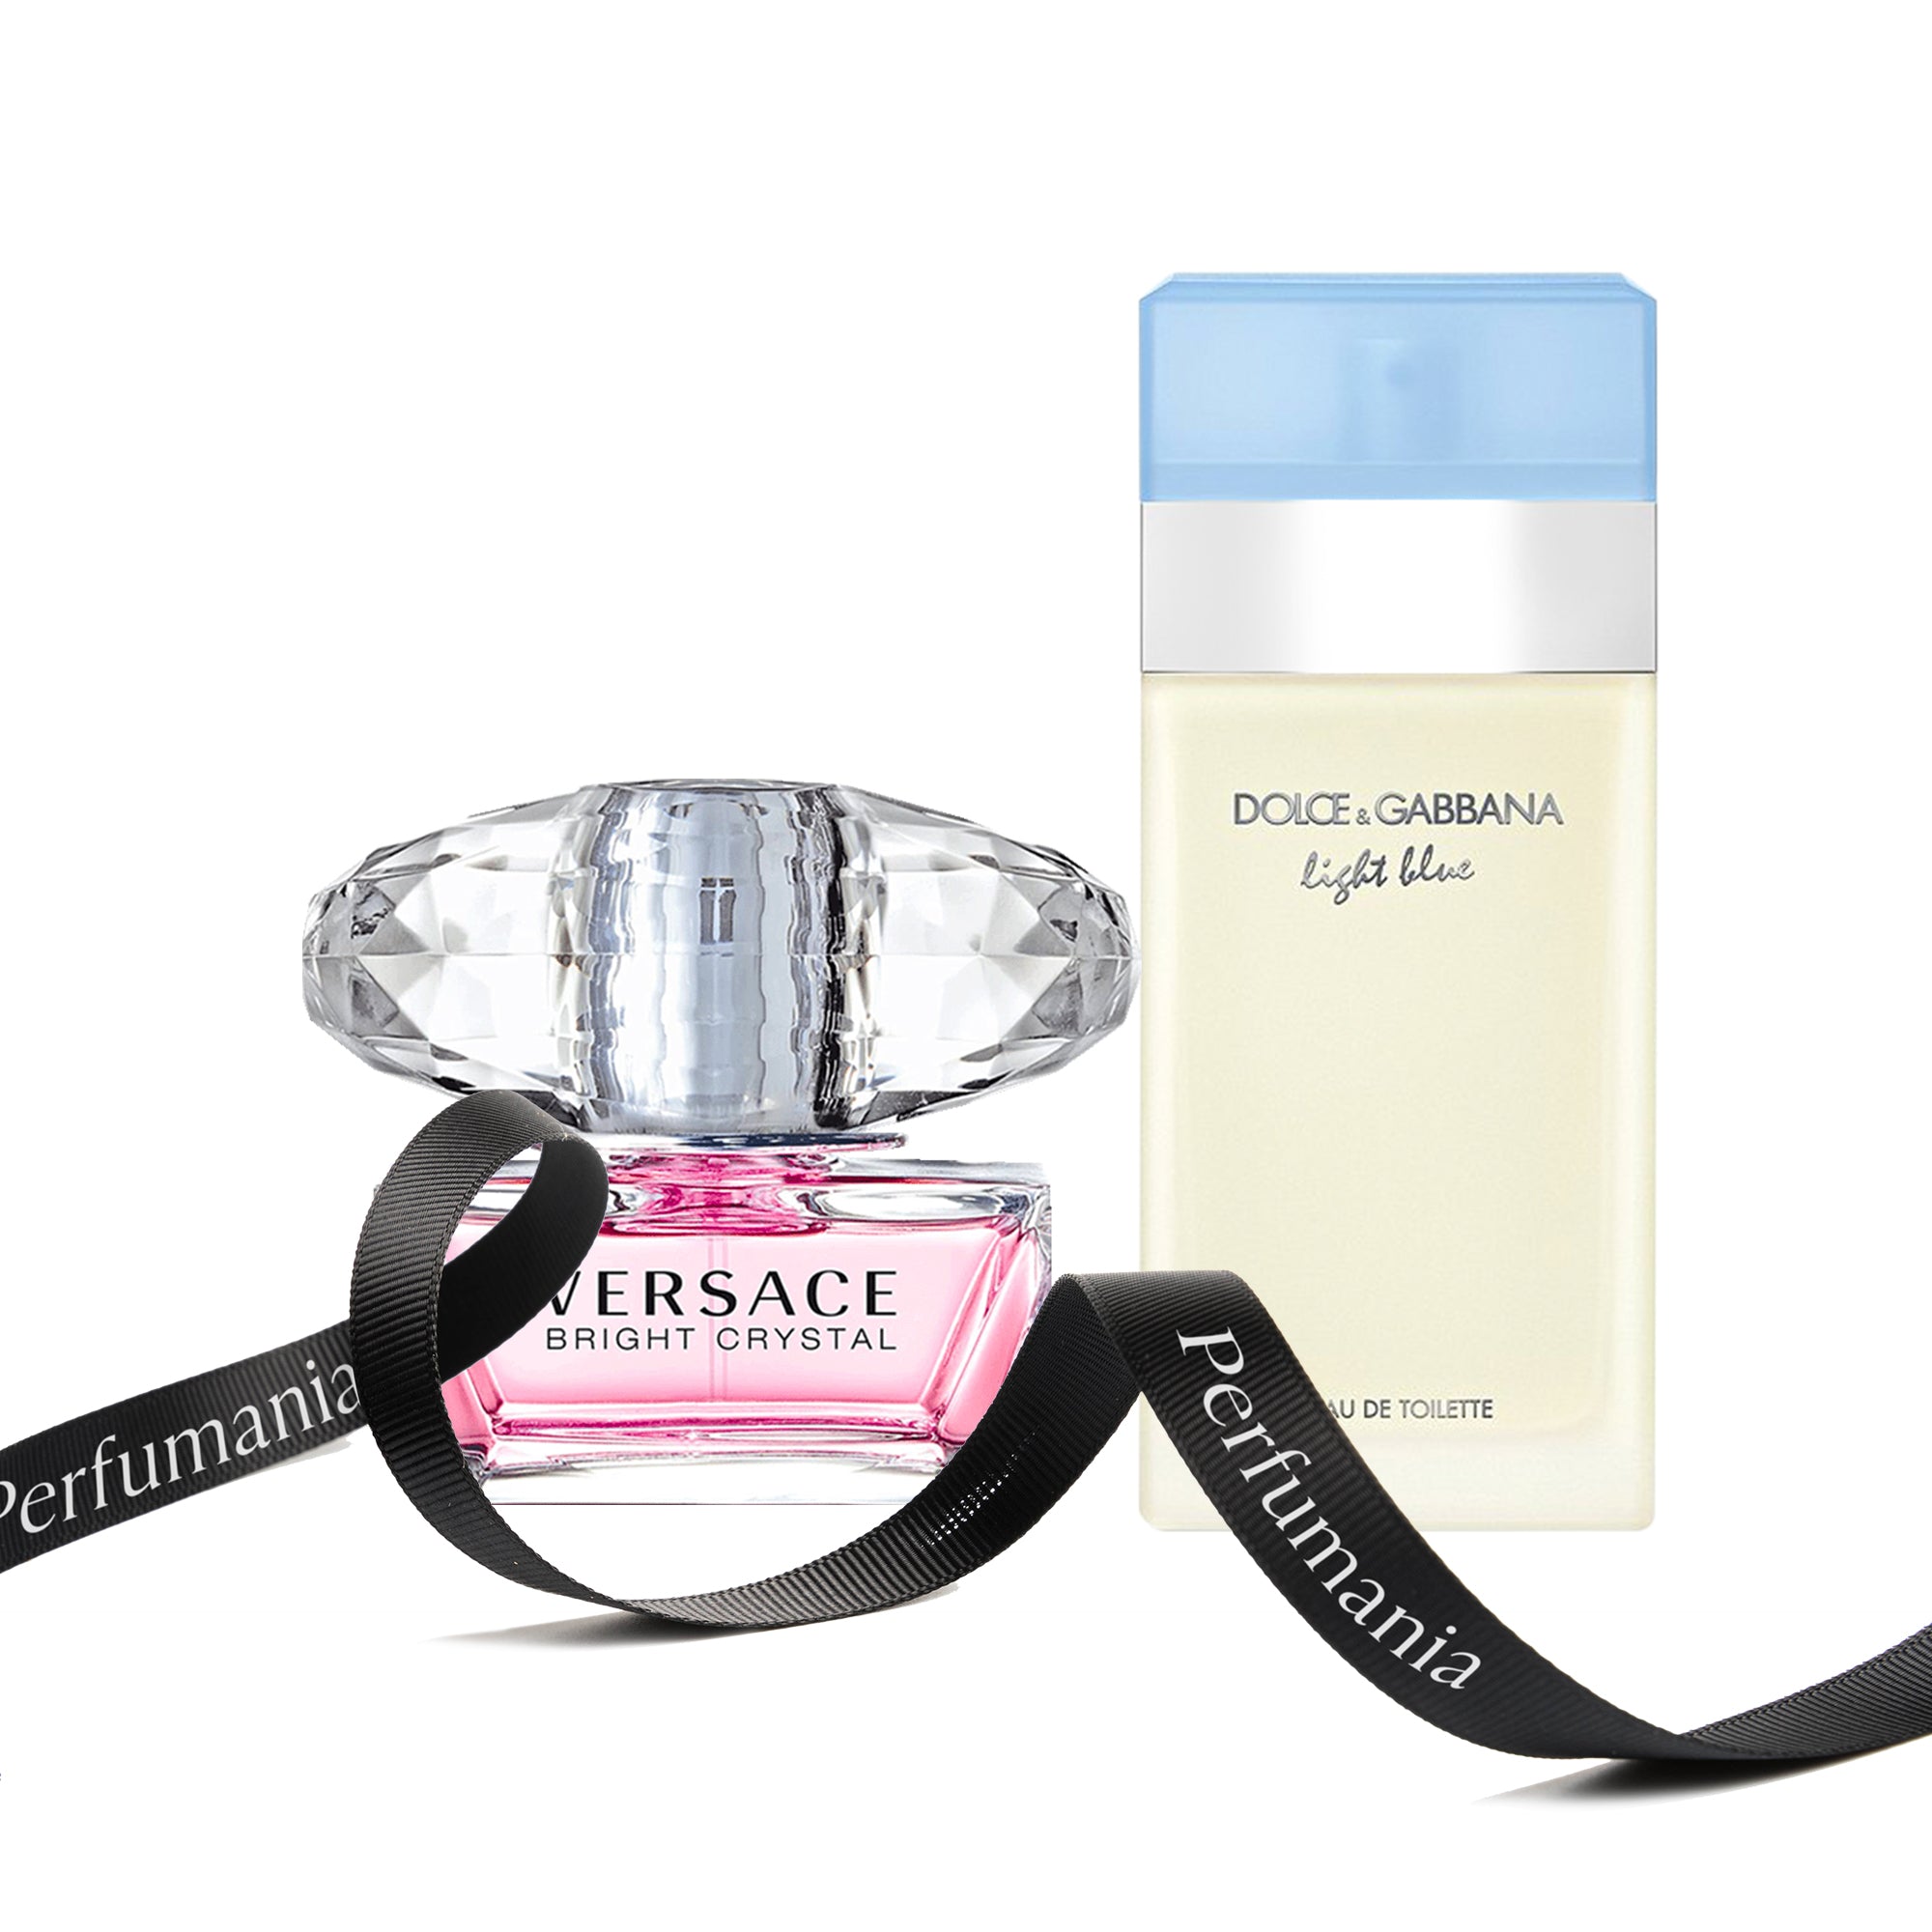 Bundle for Women: Bright Crystal by Versace and Blue by